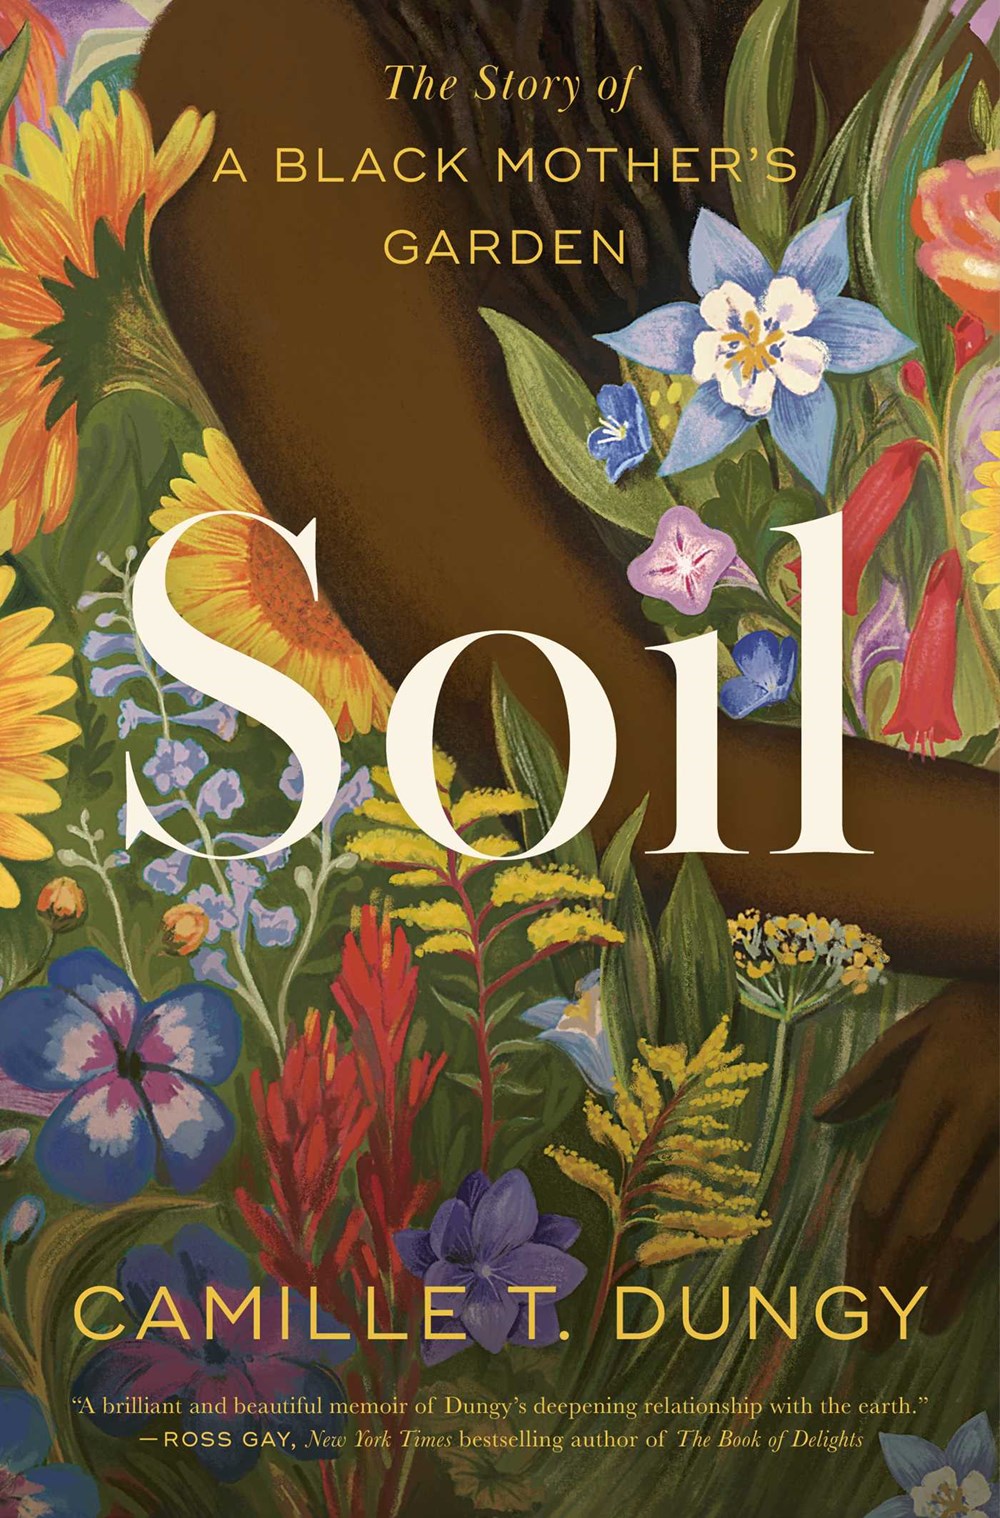 Soil : The Story of a Black Mother’s Garden by Camille T. Dungy